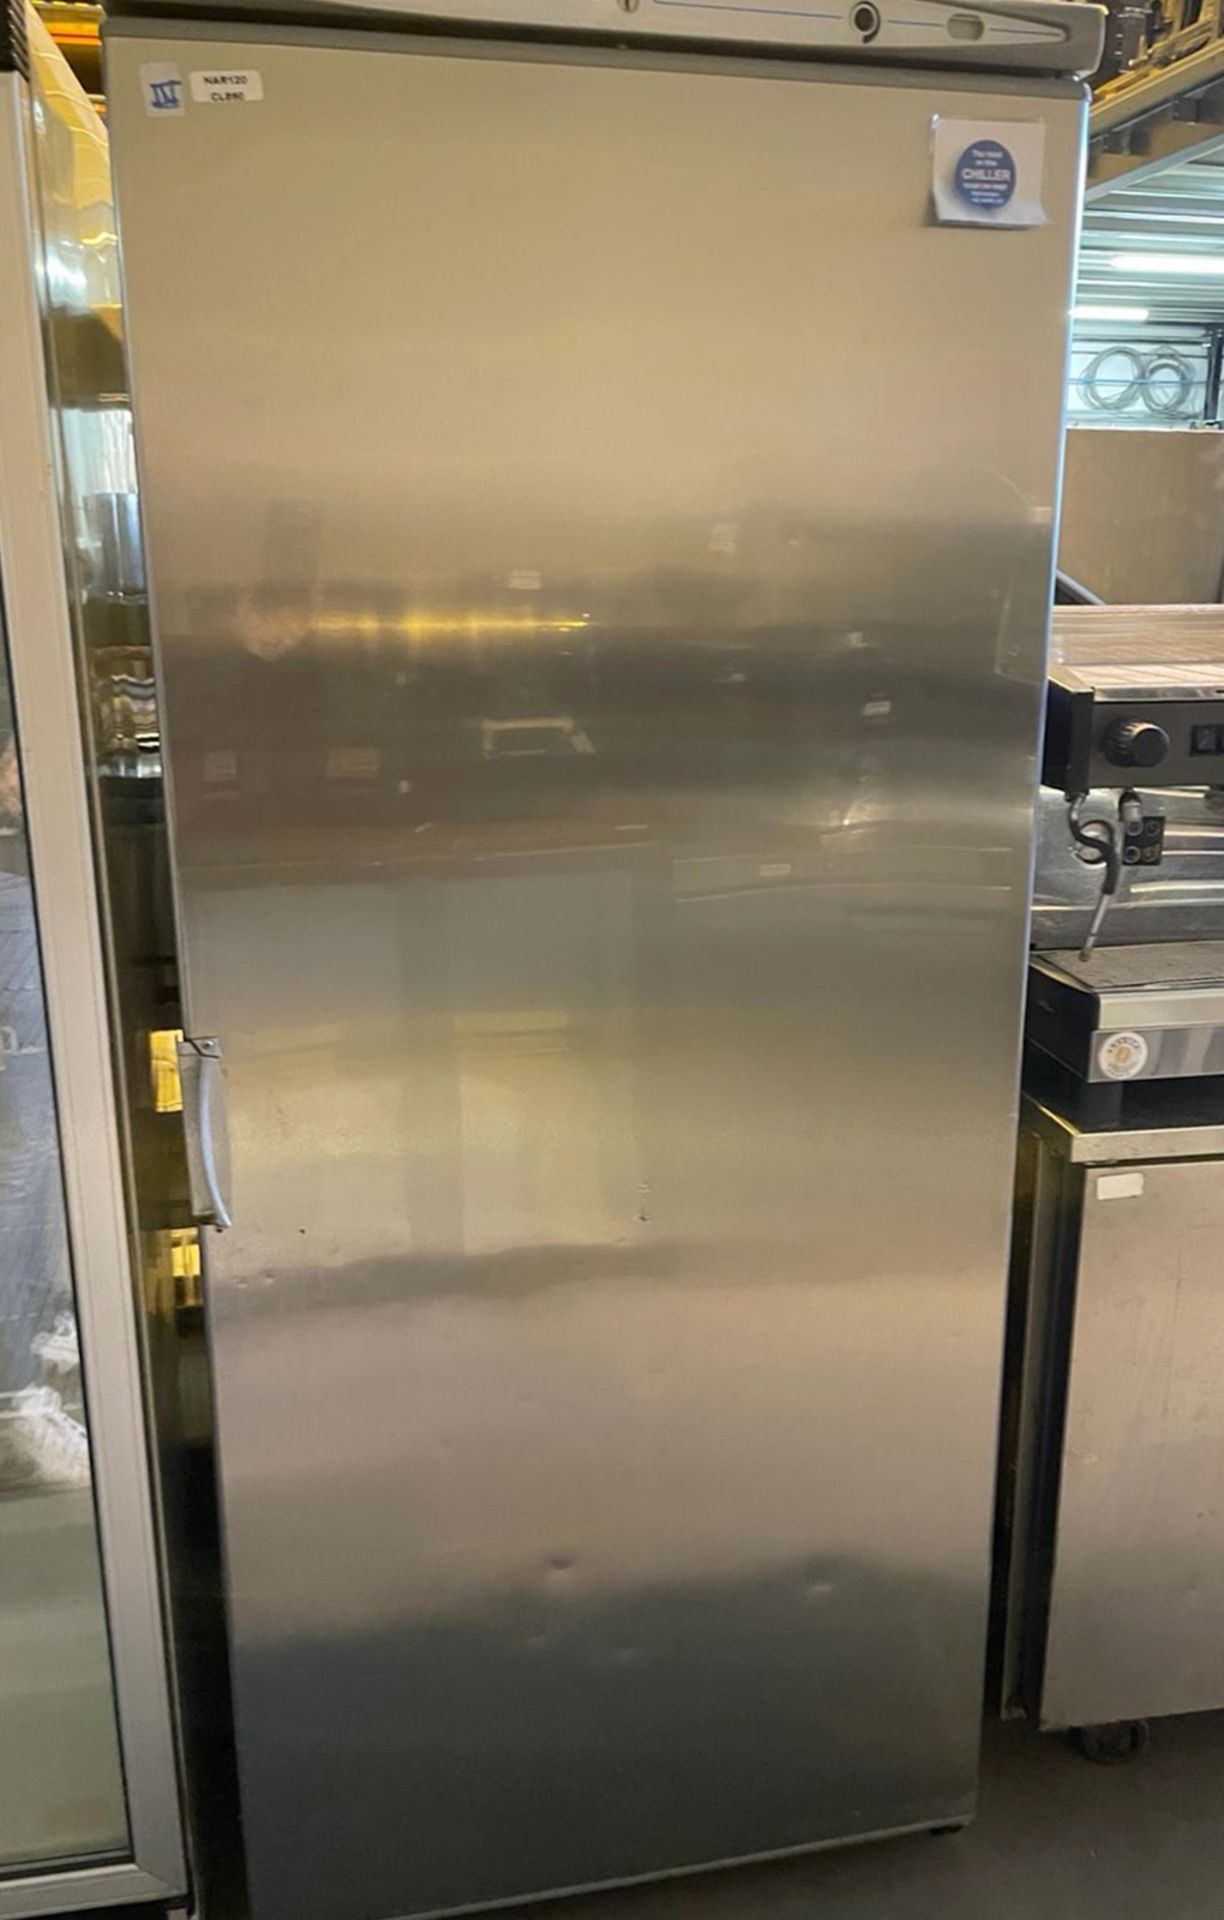 1 x Mondial KIC PRX60 Upright Refrigerator With a Stainless Steel Exterior